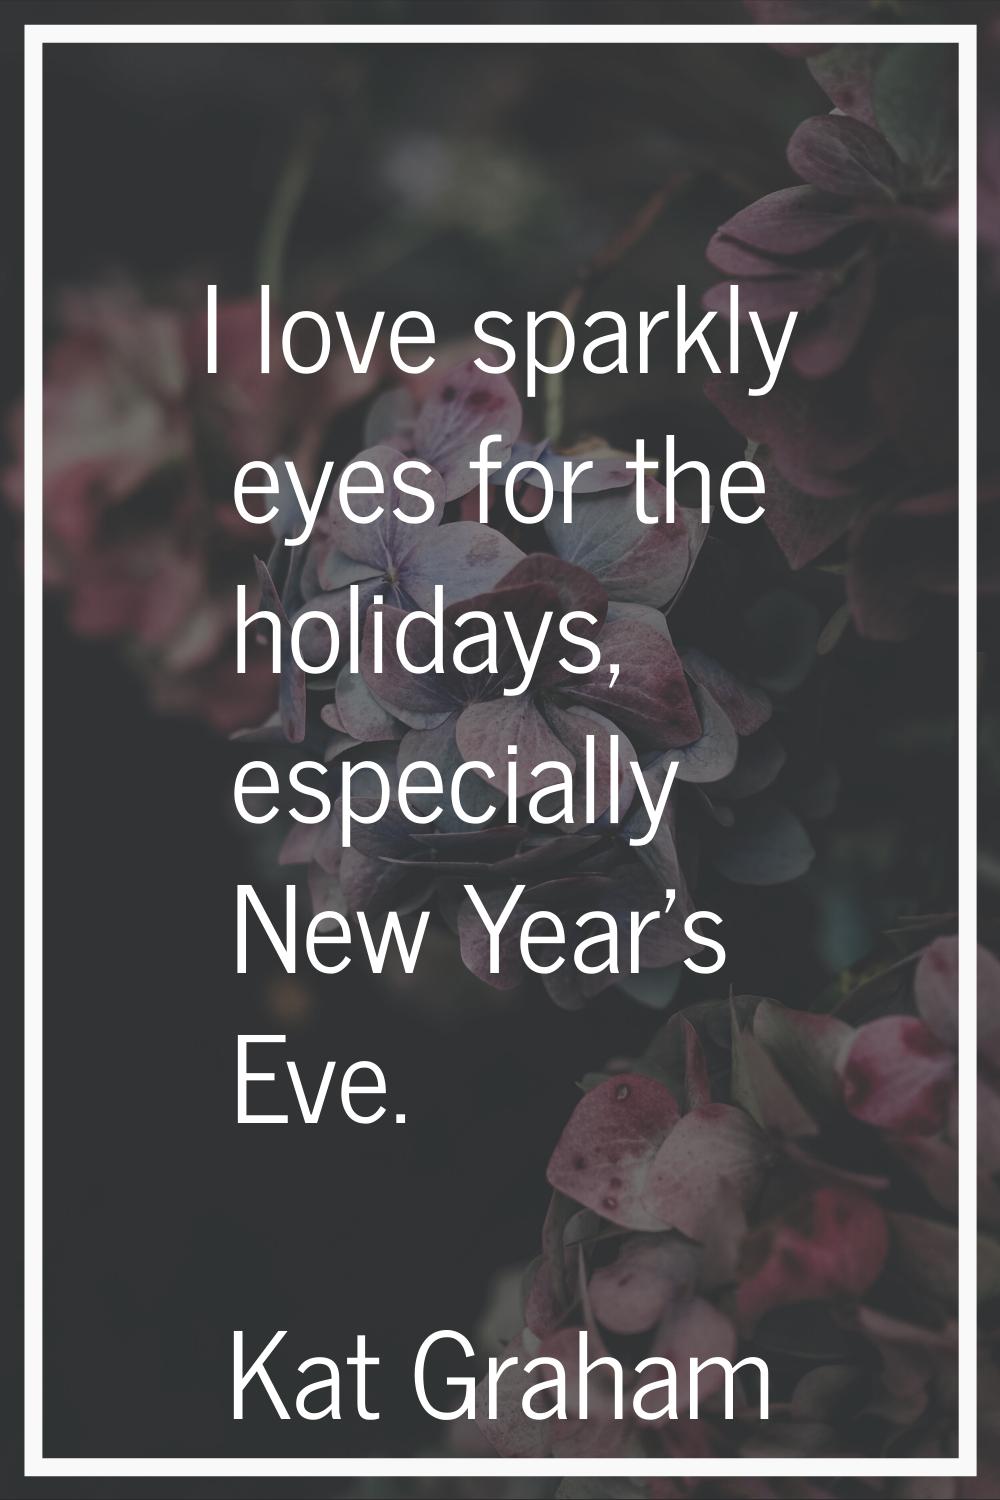 I love sparkly eyes for the holidays, especially New Year's Eve.